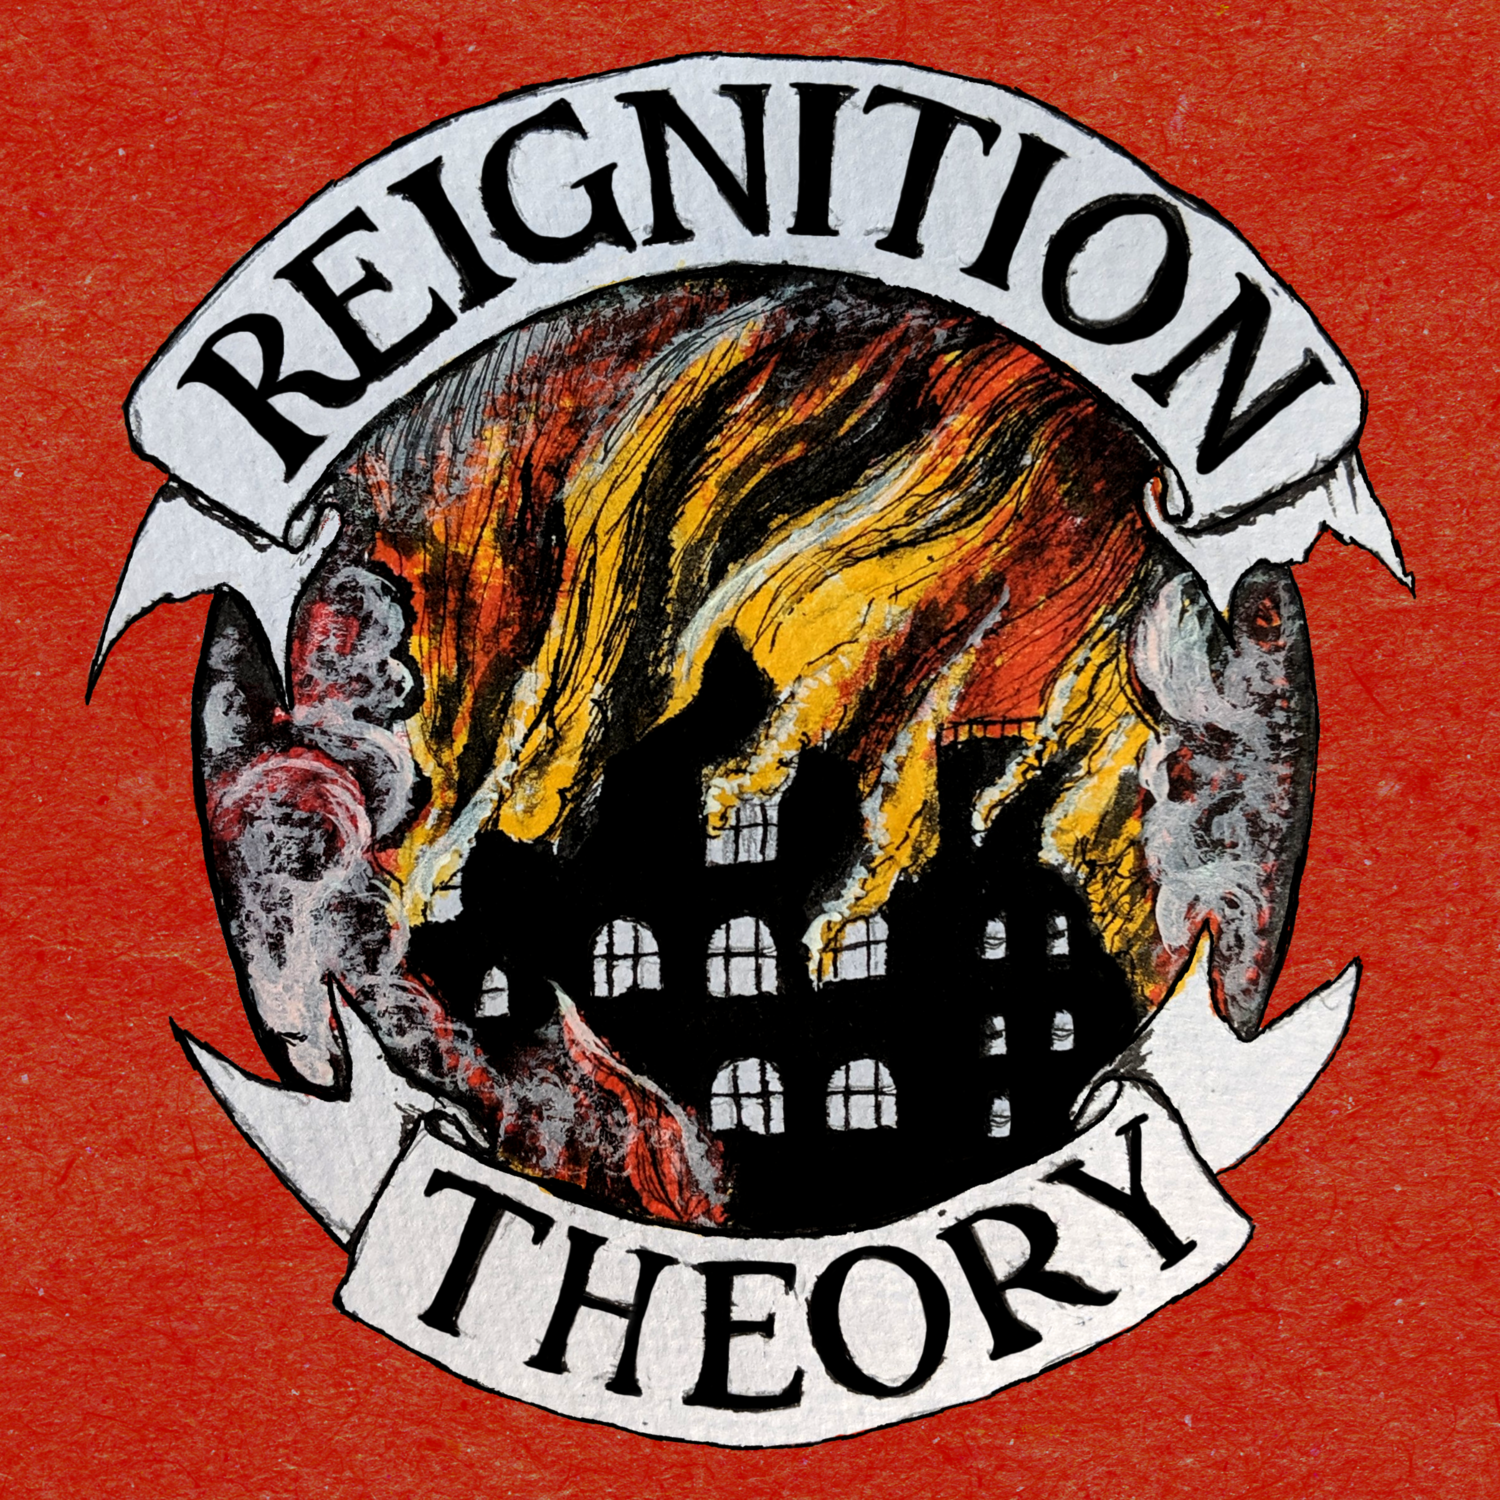 Episode 5 - Underground - The Reignition Theory